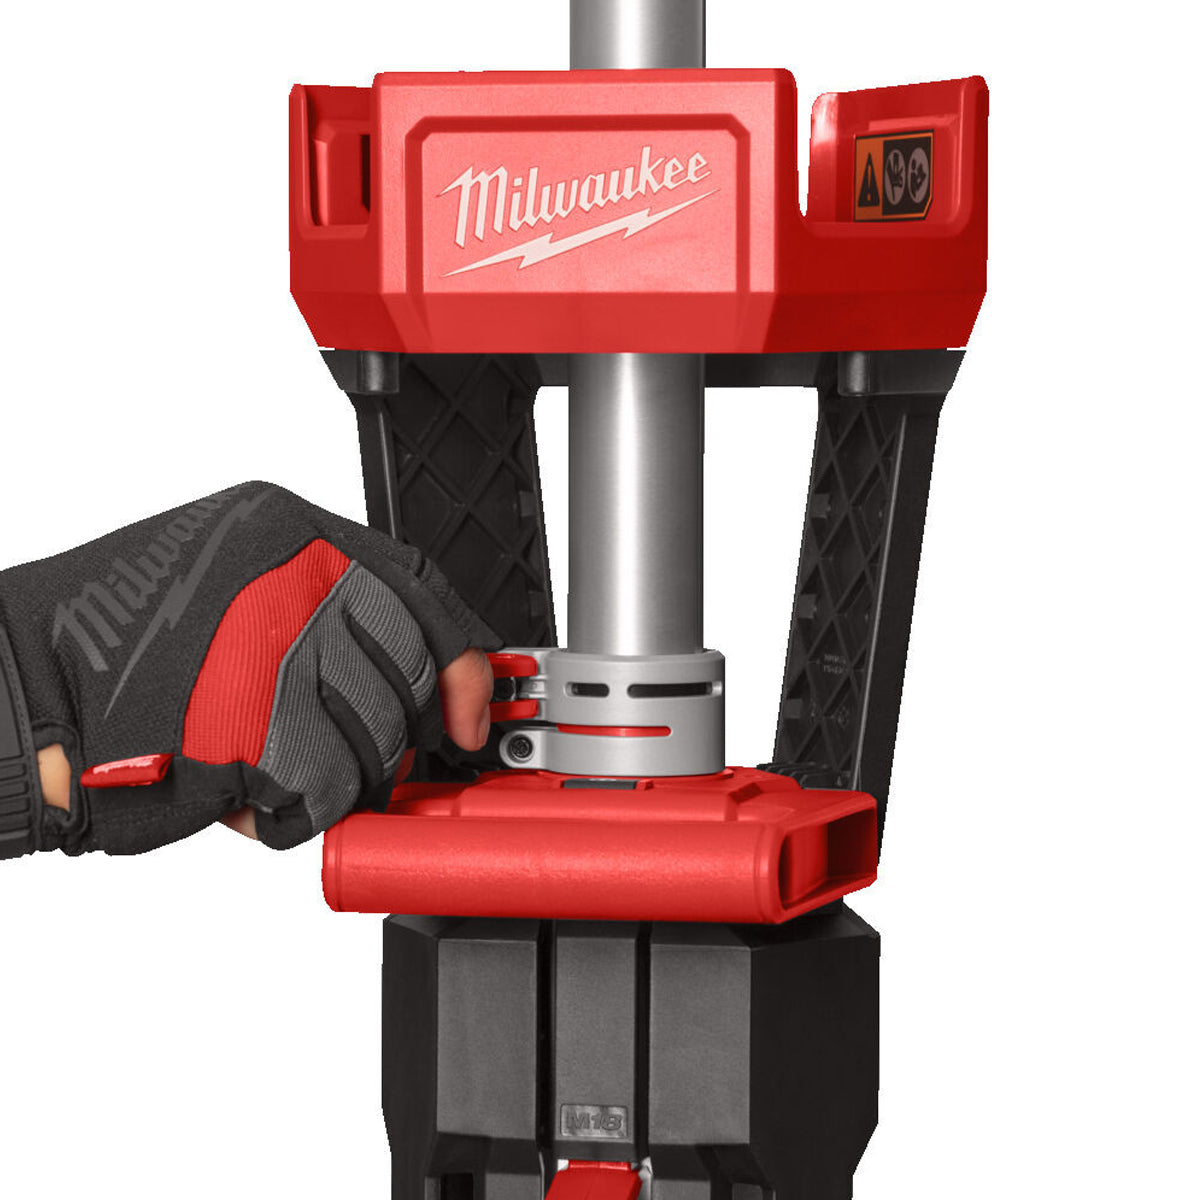 Milwaukee M18SAL2-0 18V LED Stand Light with 2 x 5.0Ah Battery & Charger